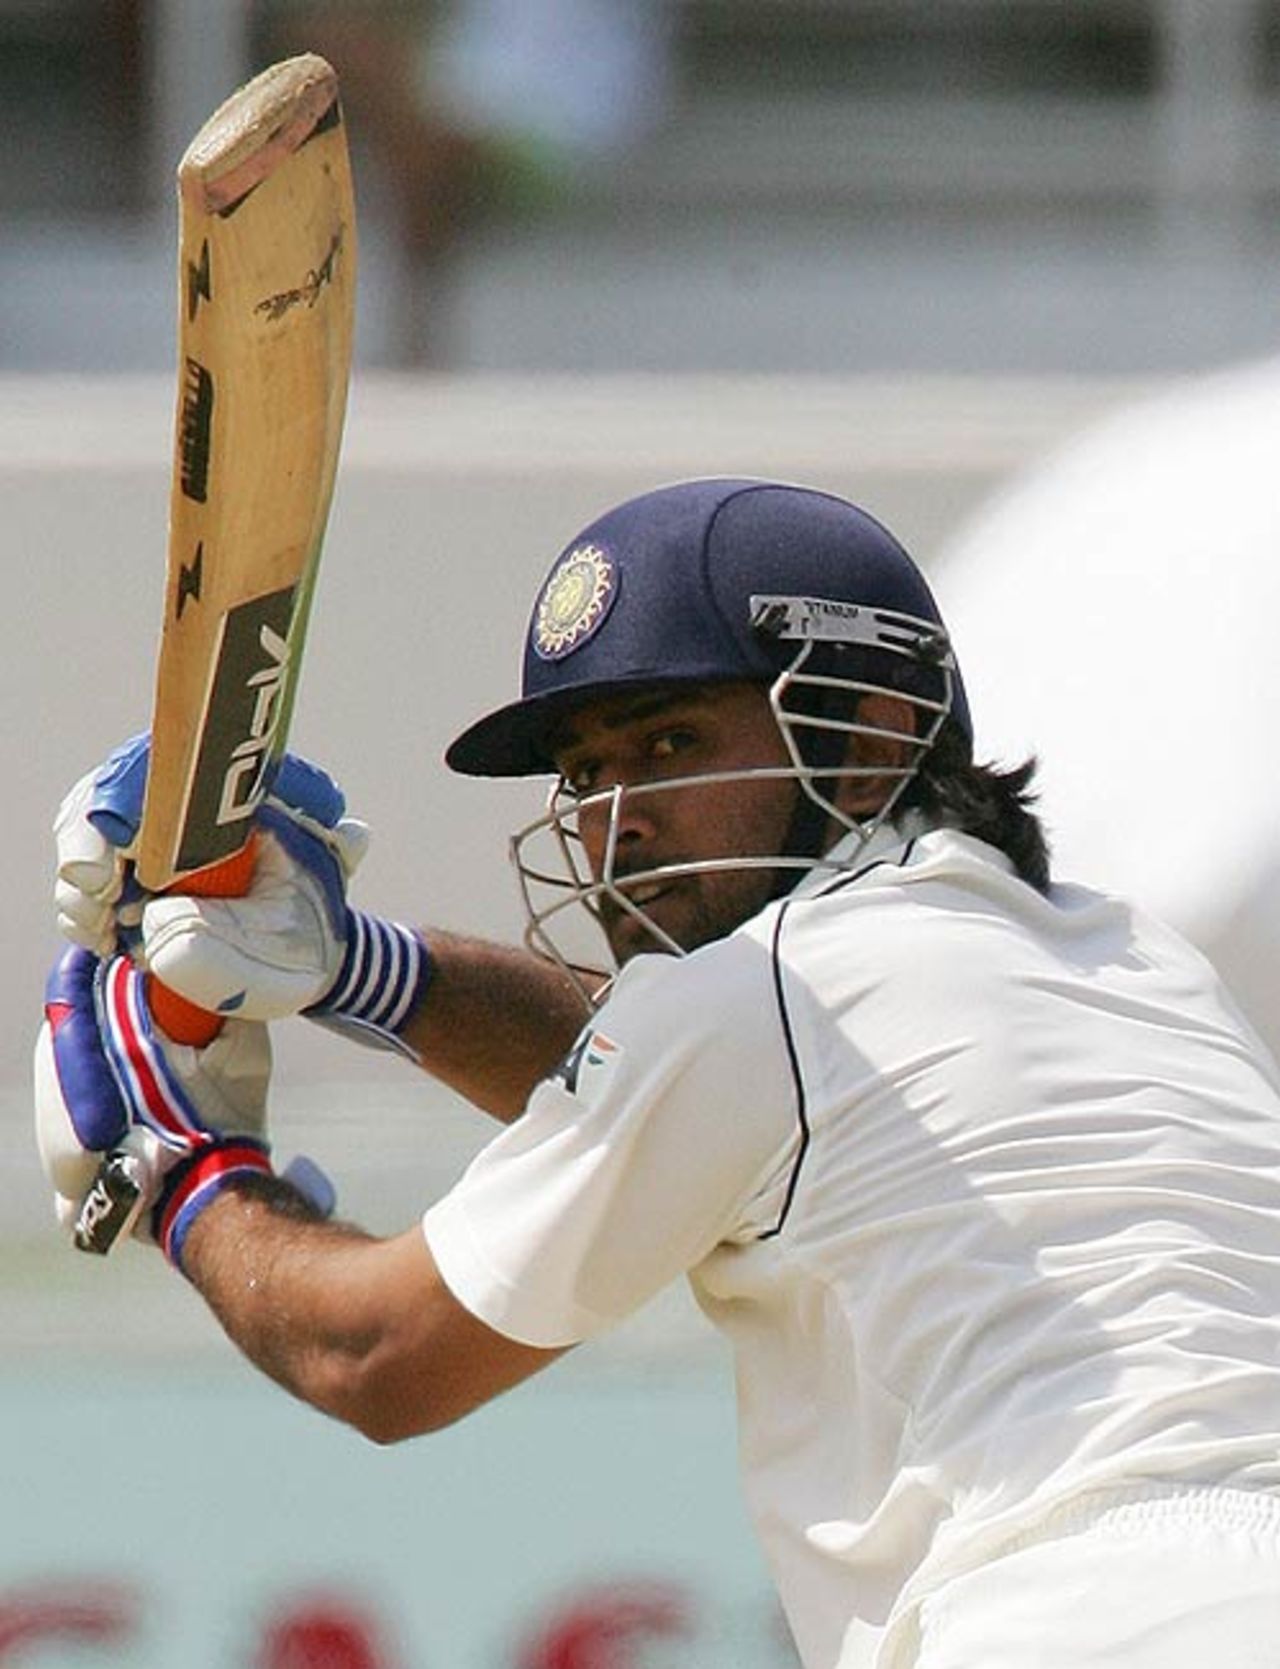 Mahendra Singh Dhoni flicks one away, South Africa v India, 2nd Test, Durban, 5th day, December 30, 2006